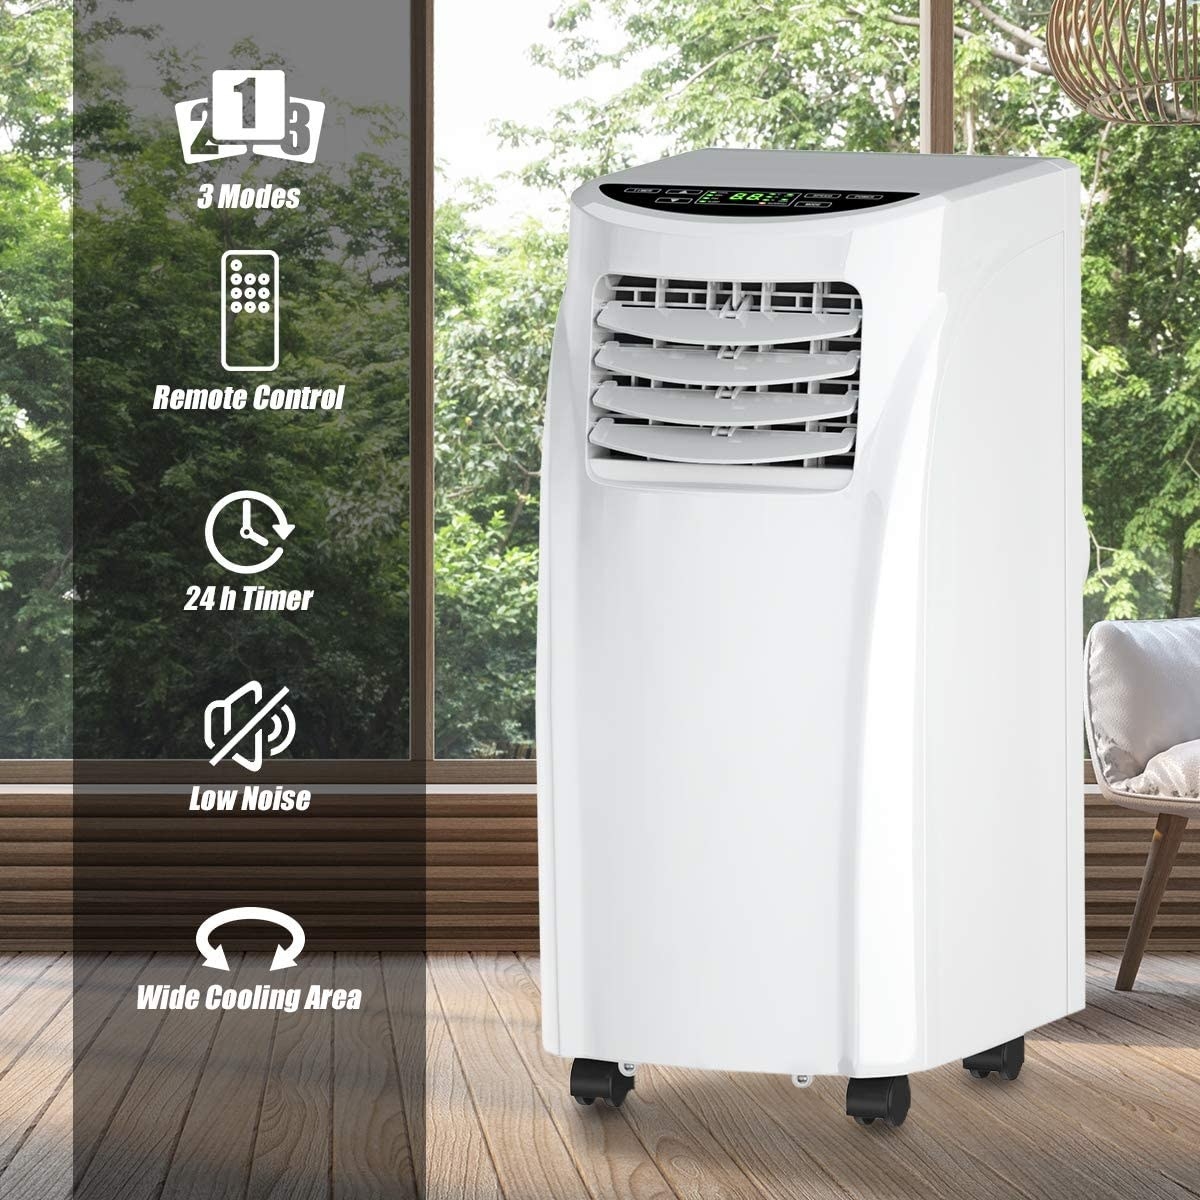 the portable air conditioner